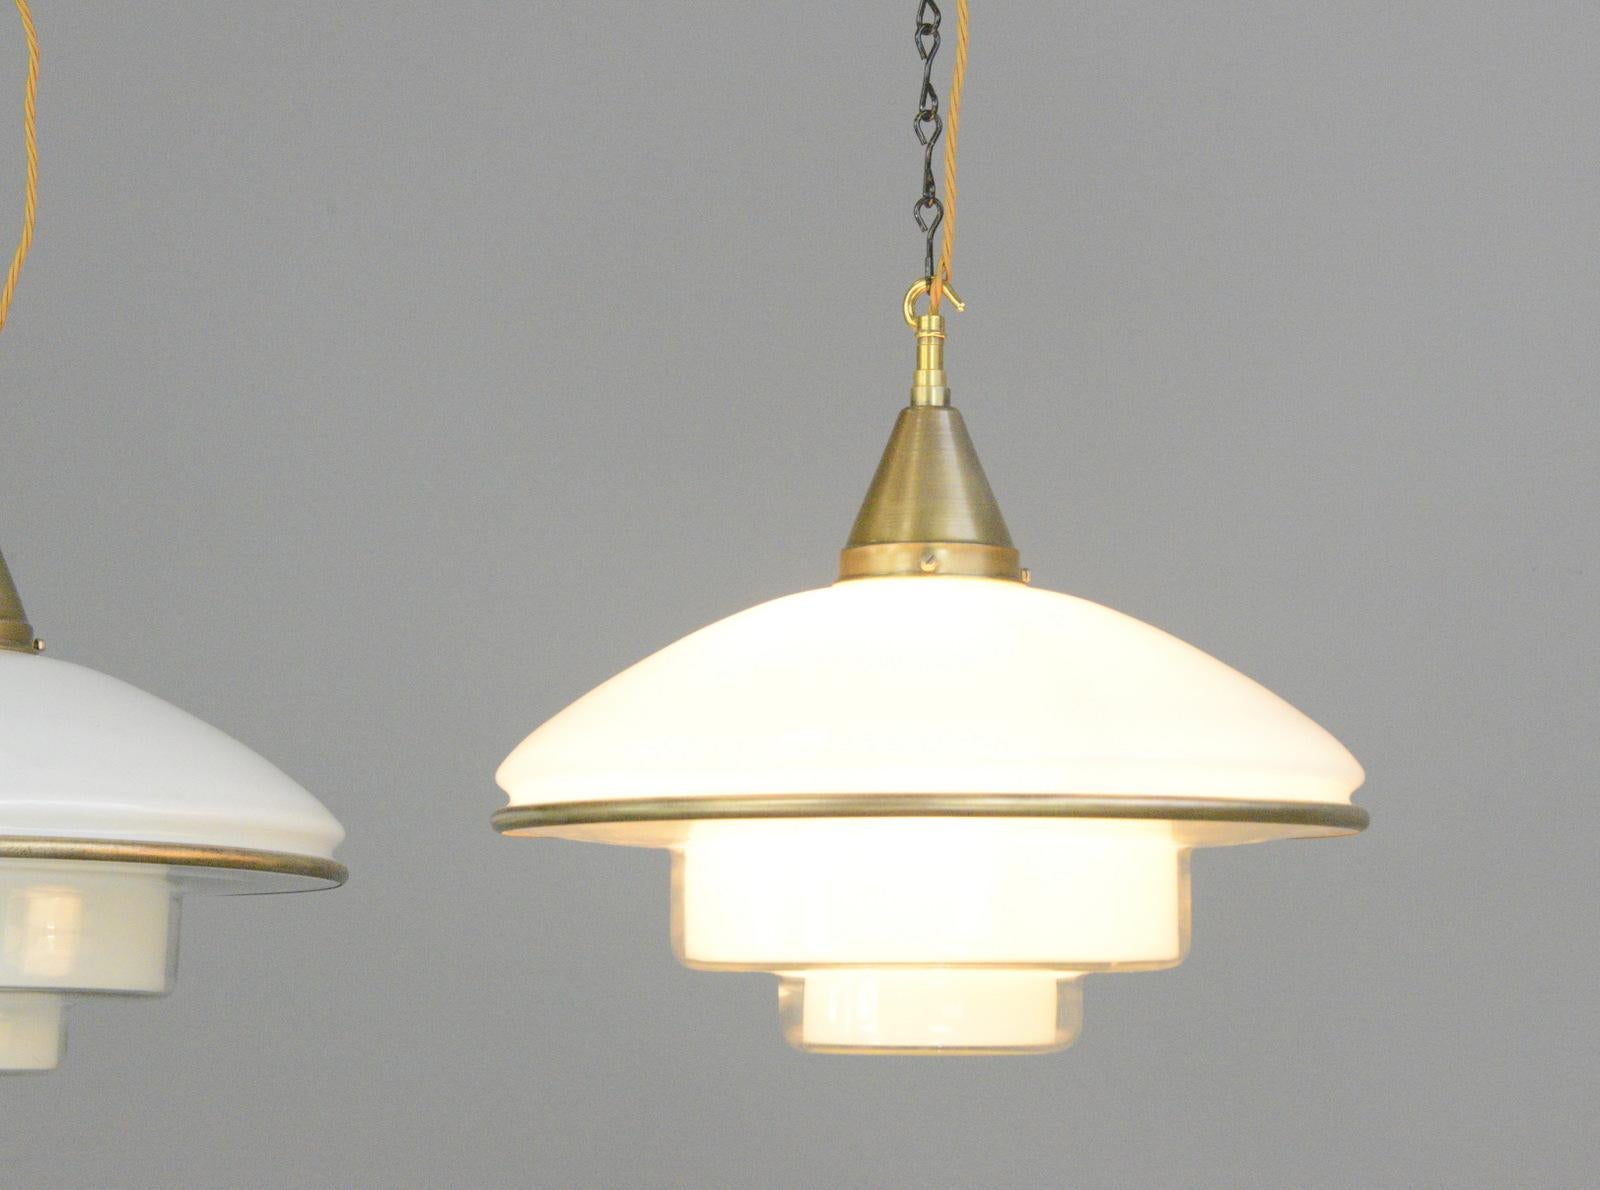 Sistrah P4 Pendant Lights by Otto Muller, Circa 1930s In Good Condition For Sale In Gloucester, GB